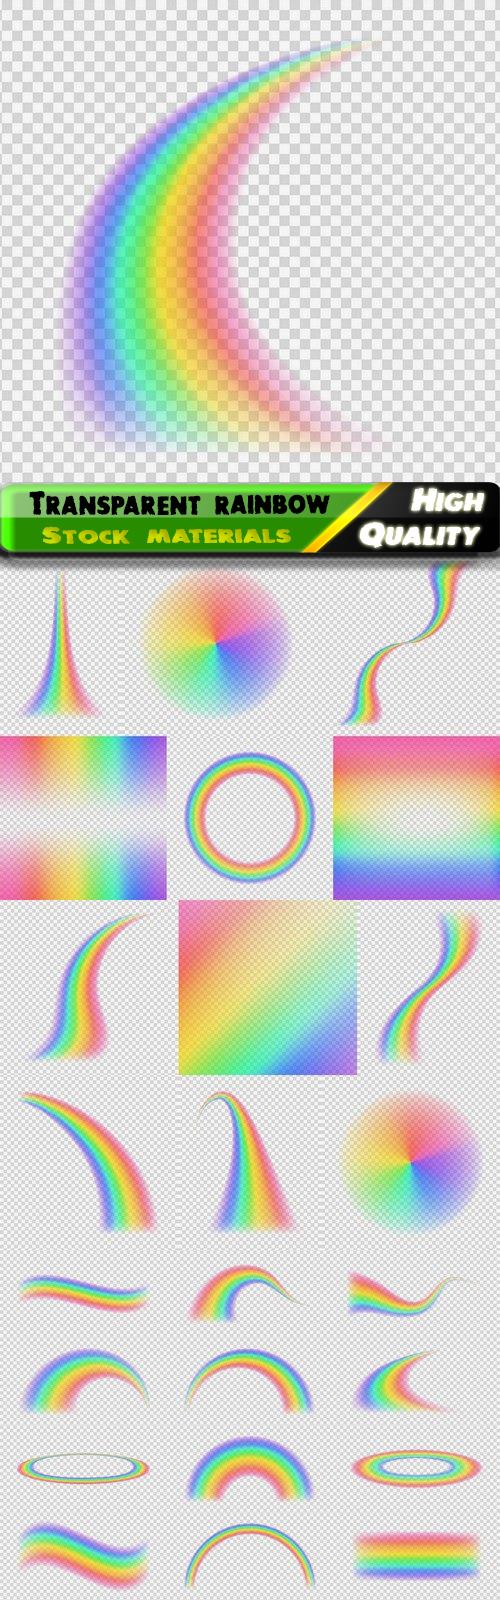 Transparent rainbow and special colored light effect - 25 Eps